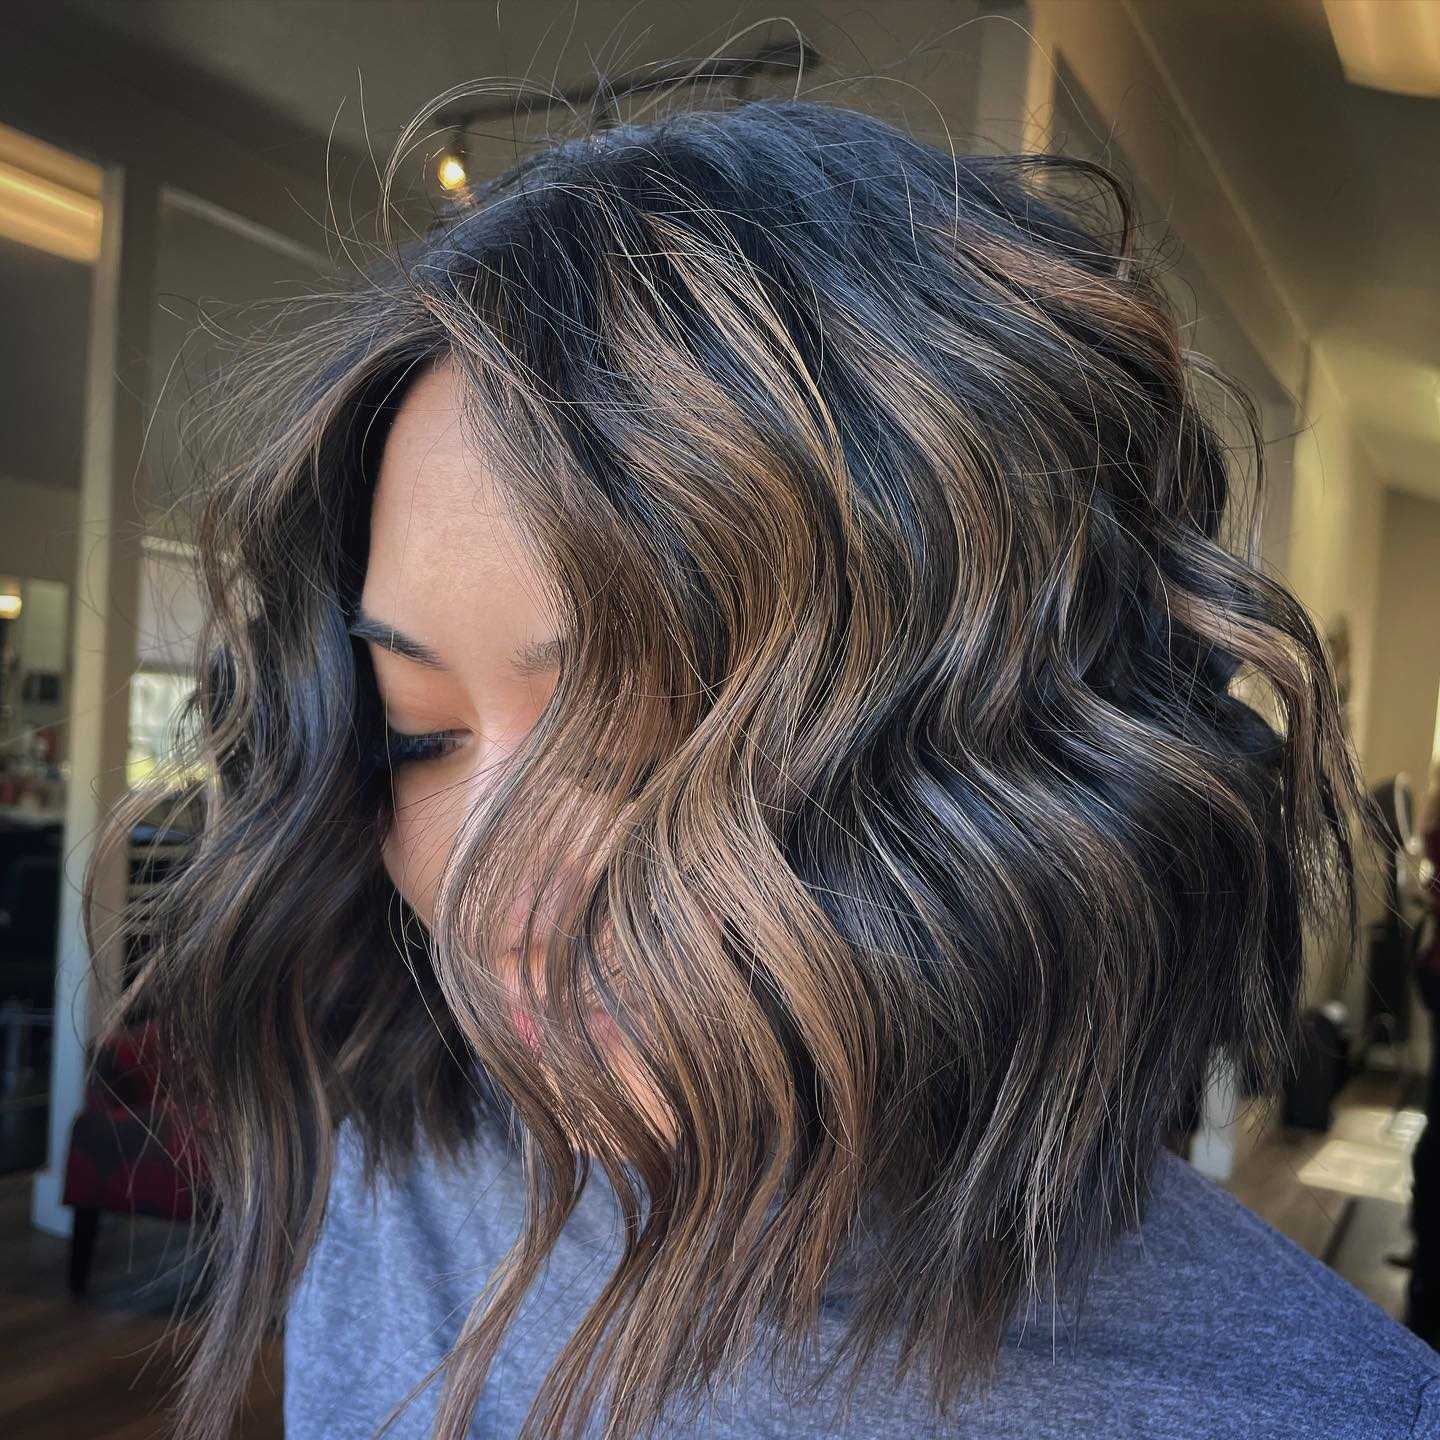 touching up your highlights to make them fresh again while keeping your hair healthy